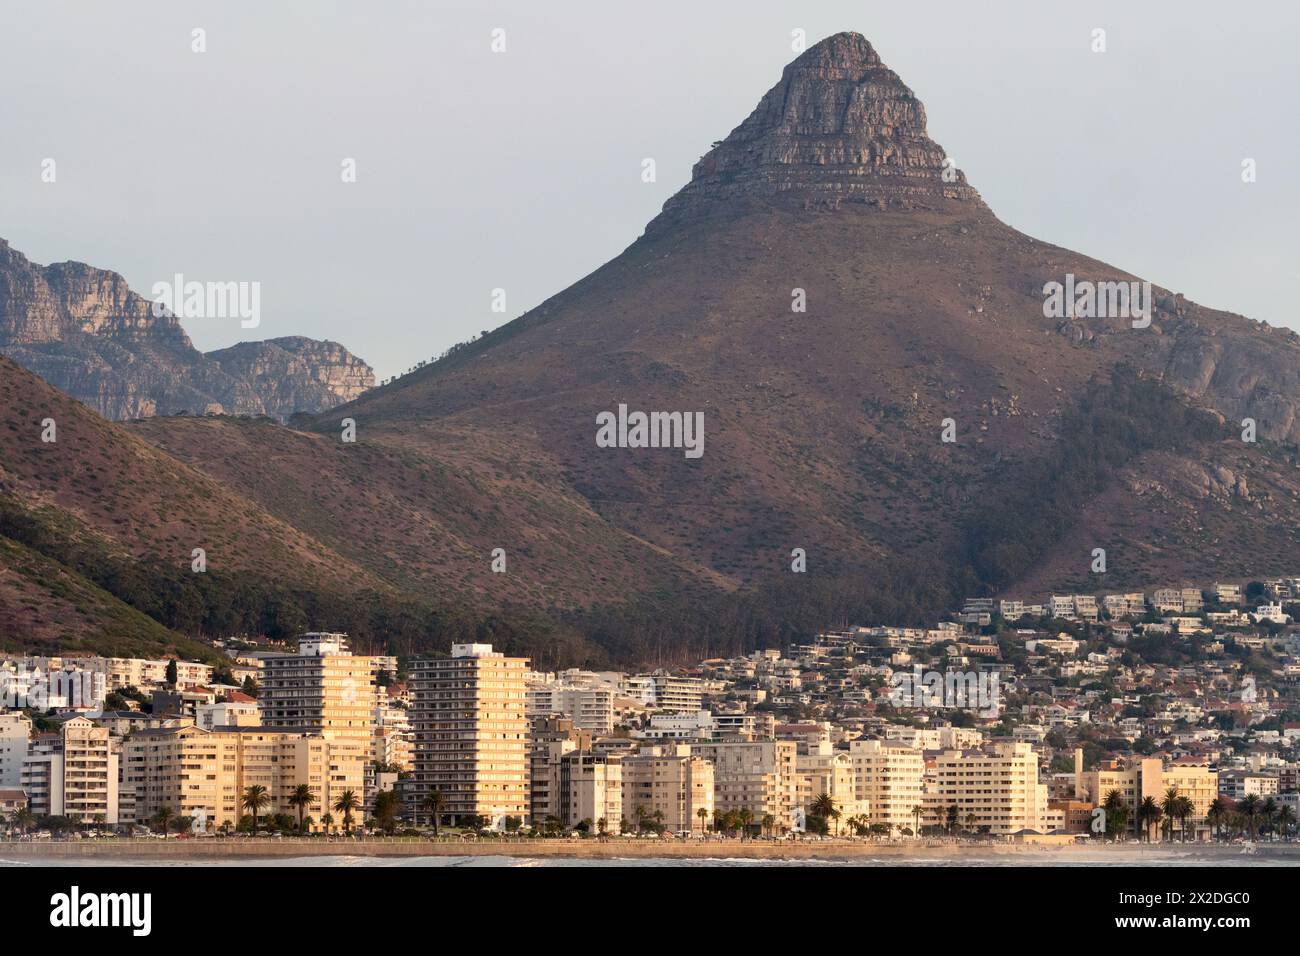 close up landscape view of Lions Head mountain and the suburb of Sea Point, Cape Town, South Africa at sunset concept travel and tourism Stock Photo